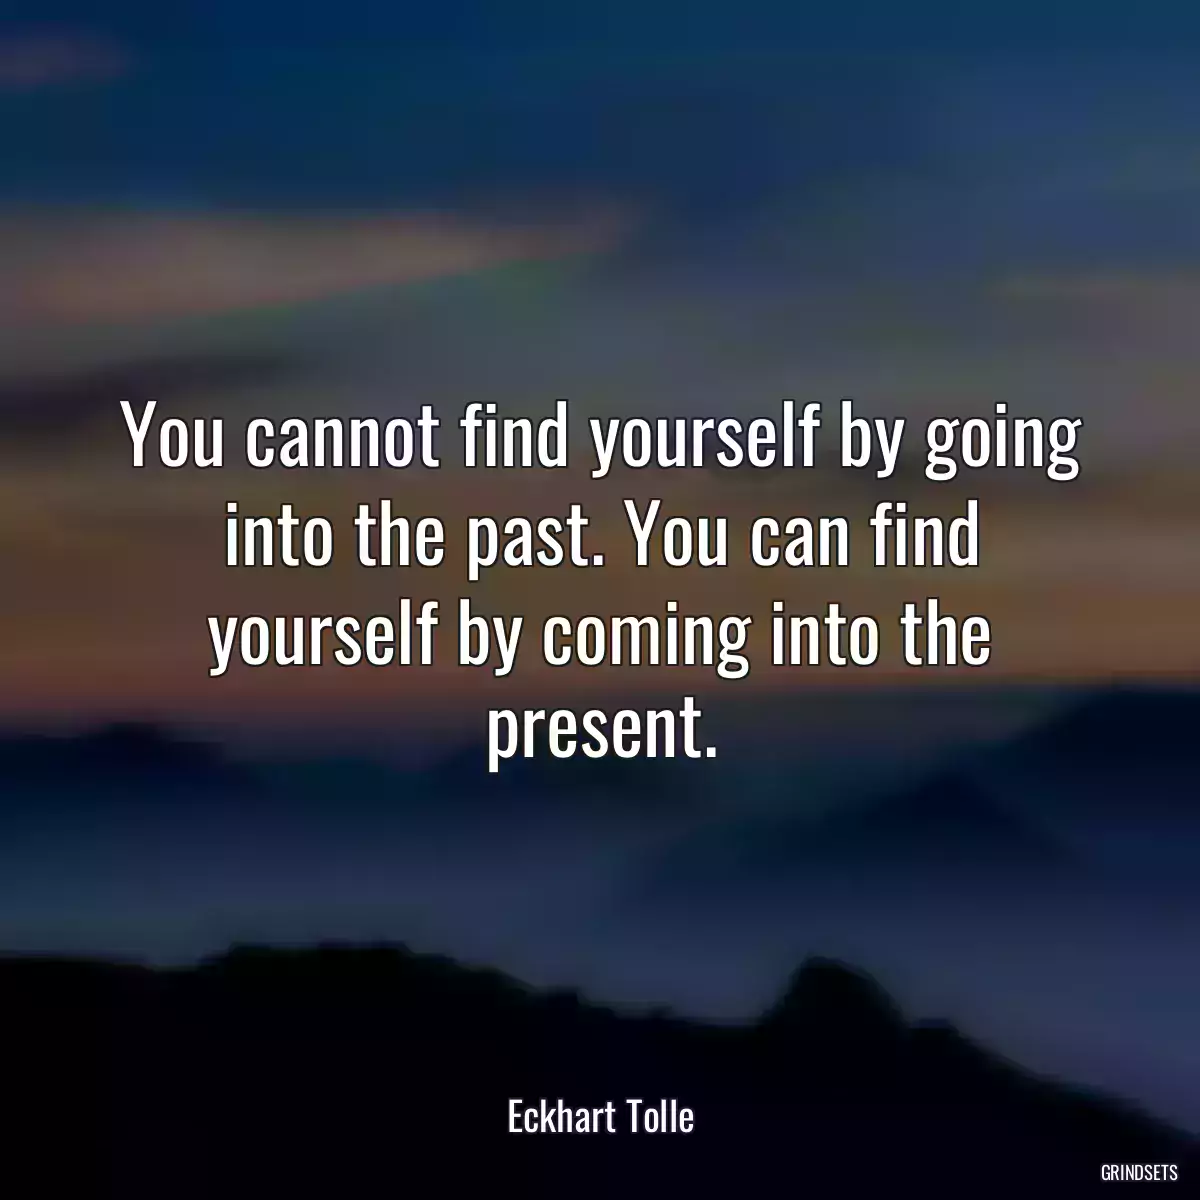 You cannot find yourself by going into the past. You can find yourself by coming into the present.